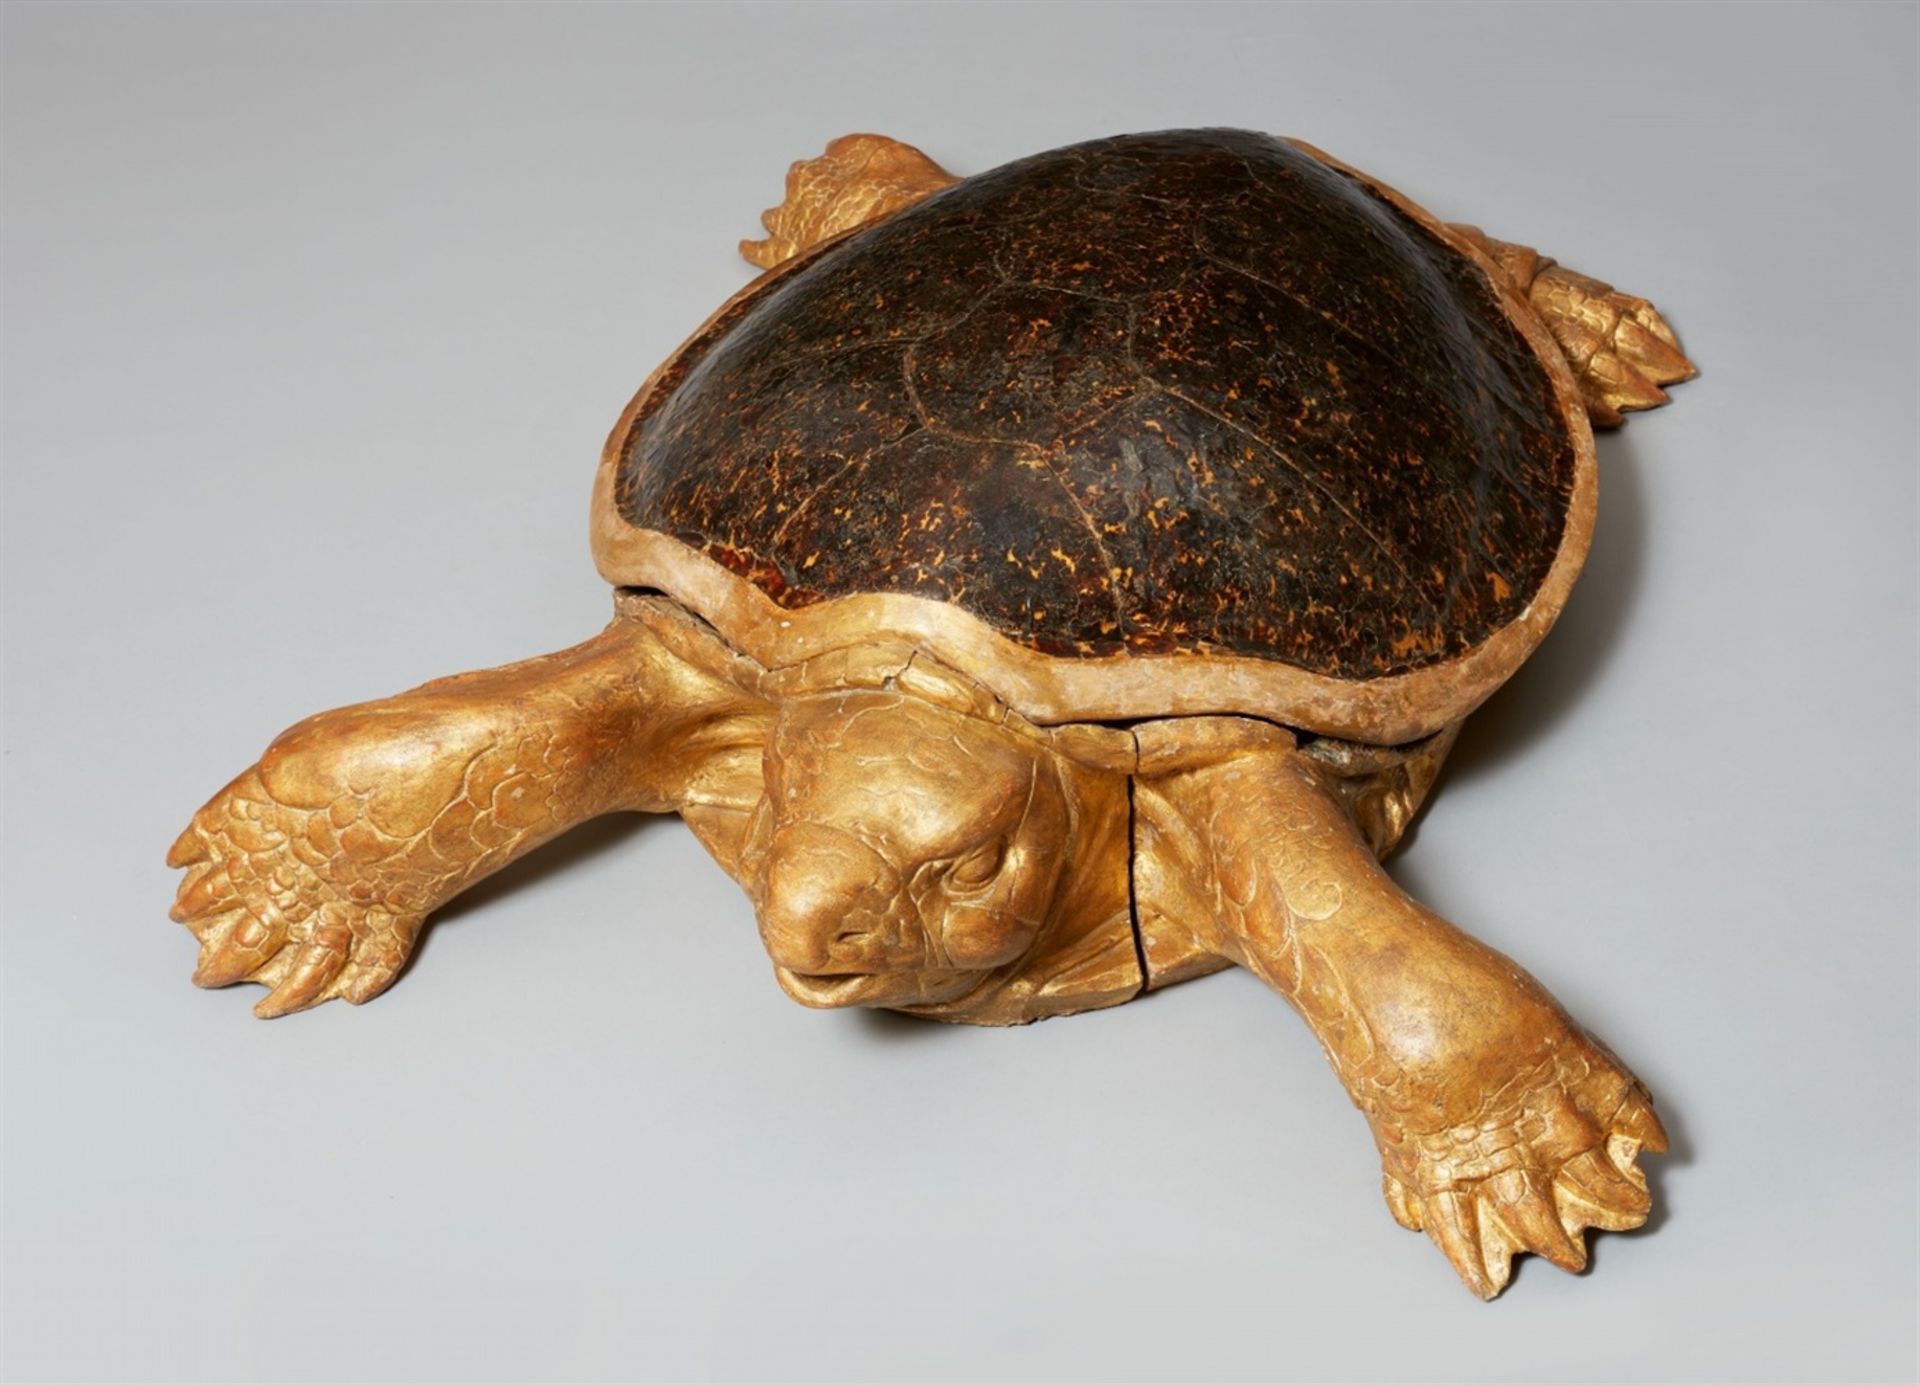 Monumental model of a turtleLife-sized model of a giant turtle; the head and legs made from gilded